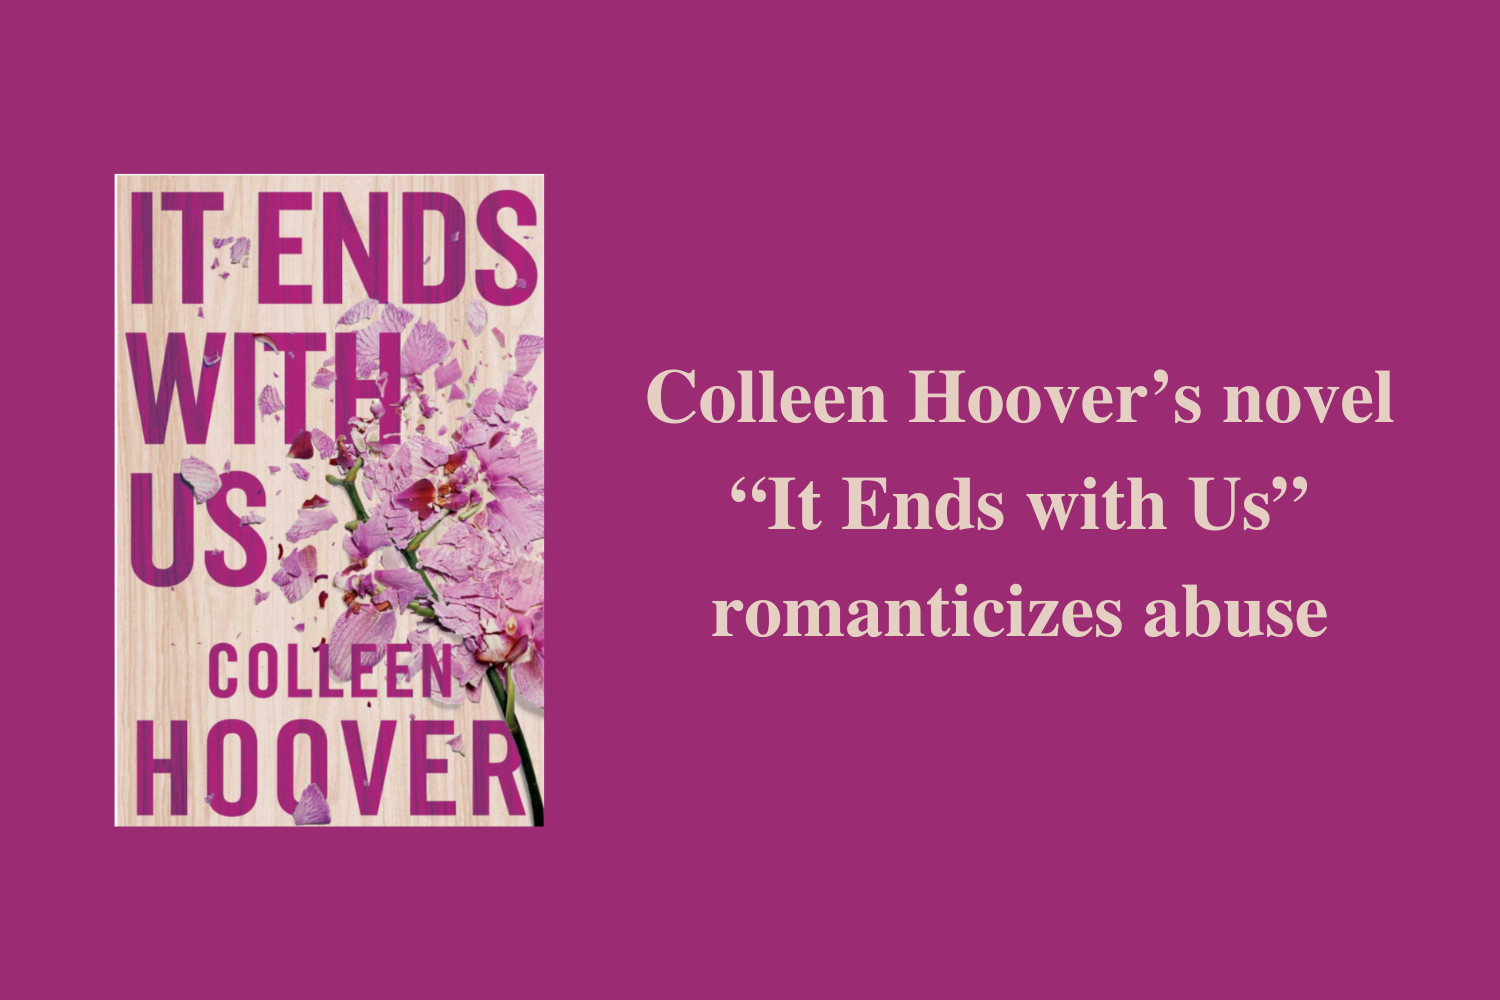 Colleen Hoover's novel “It Ends with Us” romanticizes abuse – The